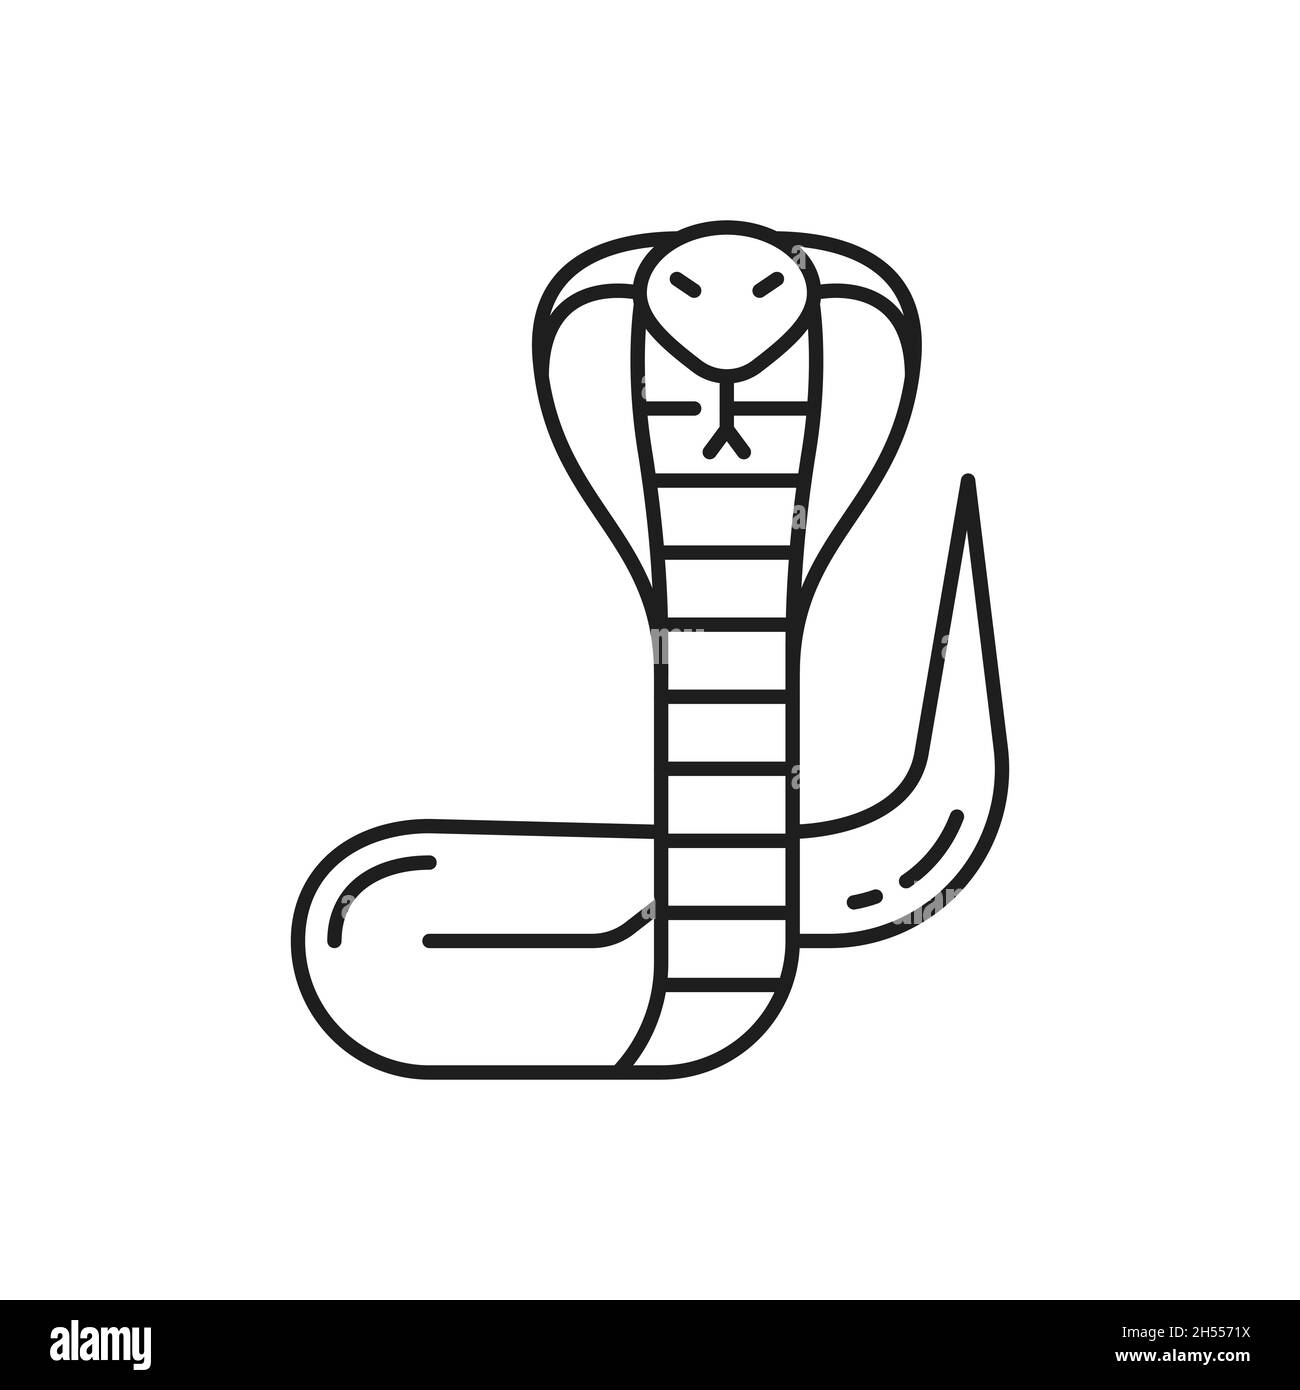 Thailand snake isolated thin line icon. Vector poisonous crawling invertebrate carling animal, linear Viper snake or rattlesnake from Thai or Thailand Stock Vector